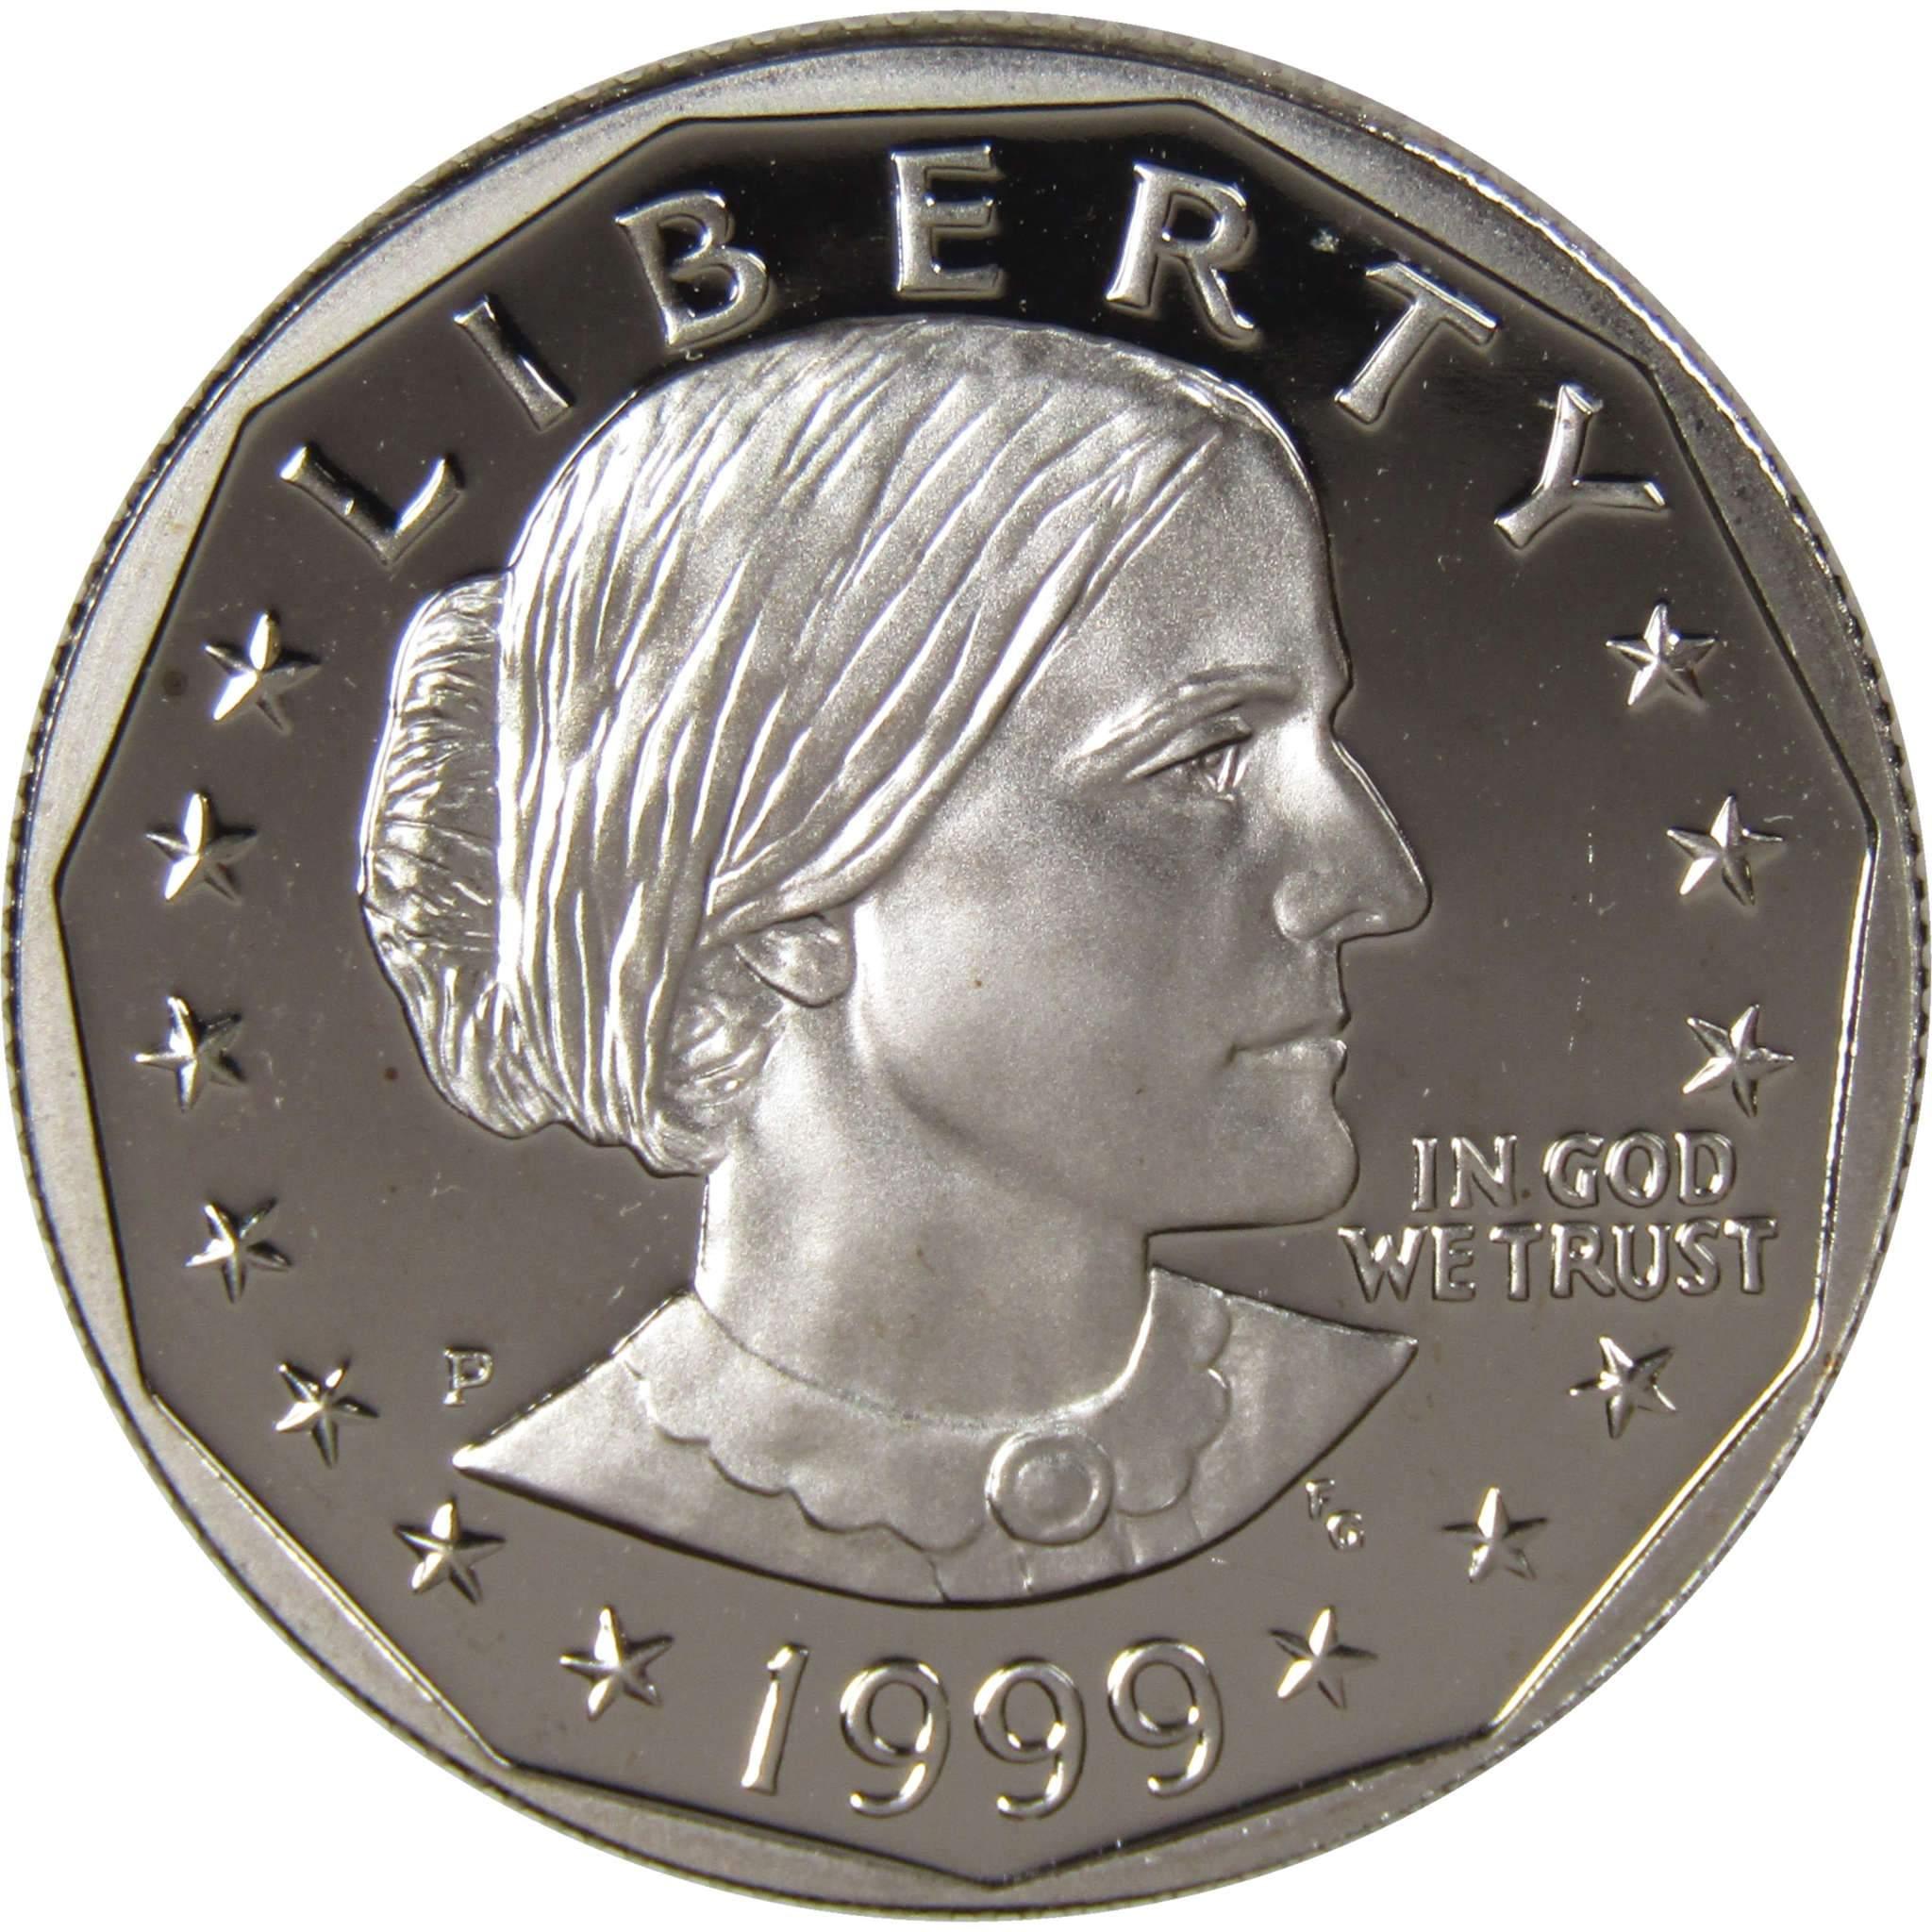 1999 P Susan B Anthony Dollar Choice Proof SBA $1 US Coin Collectible